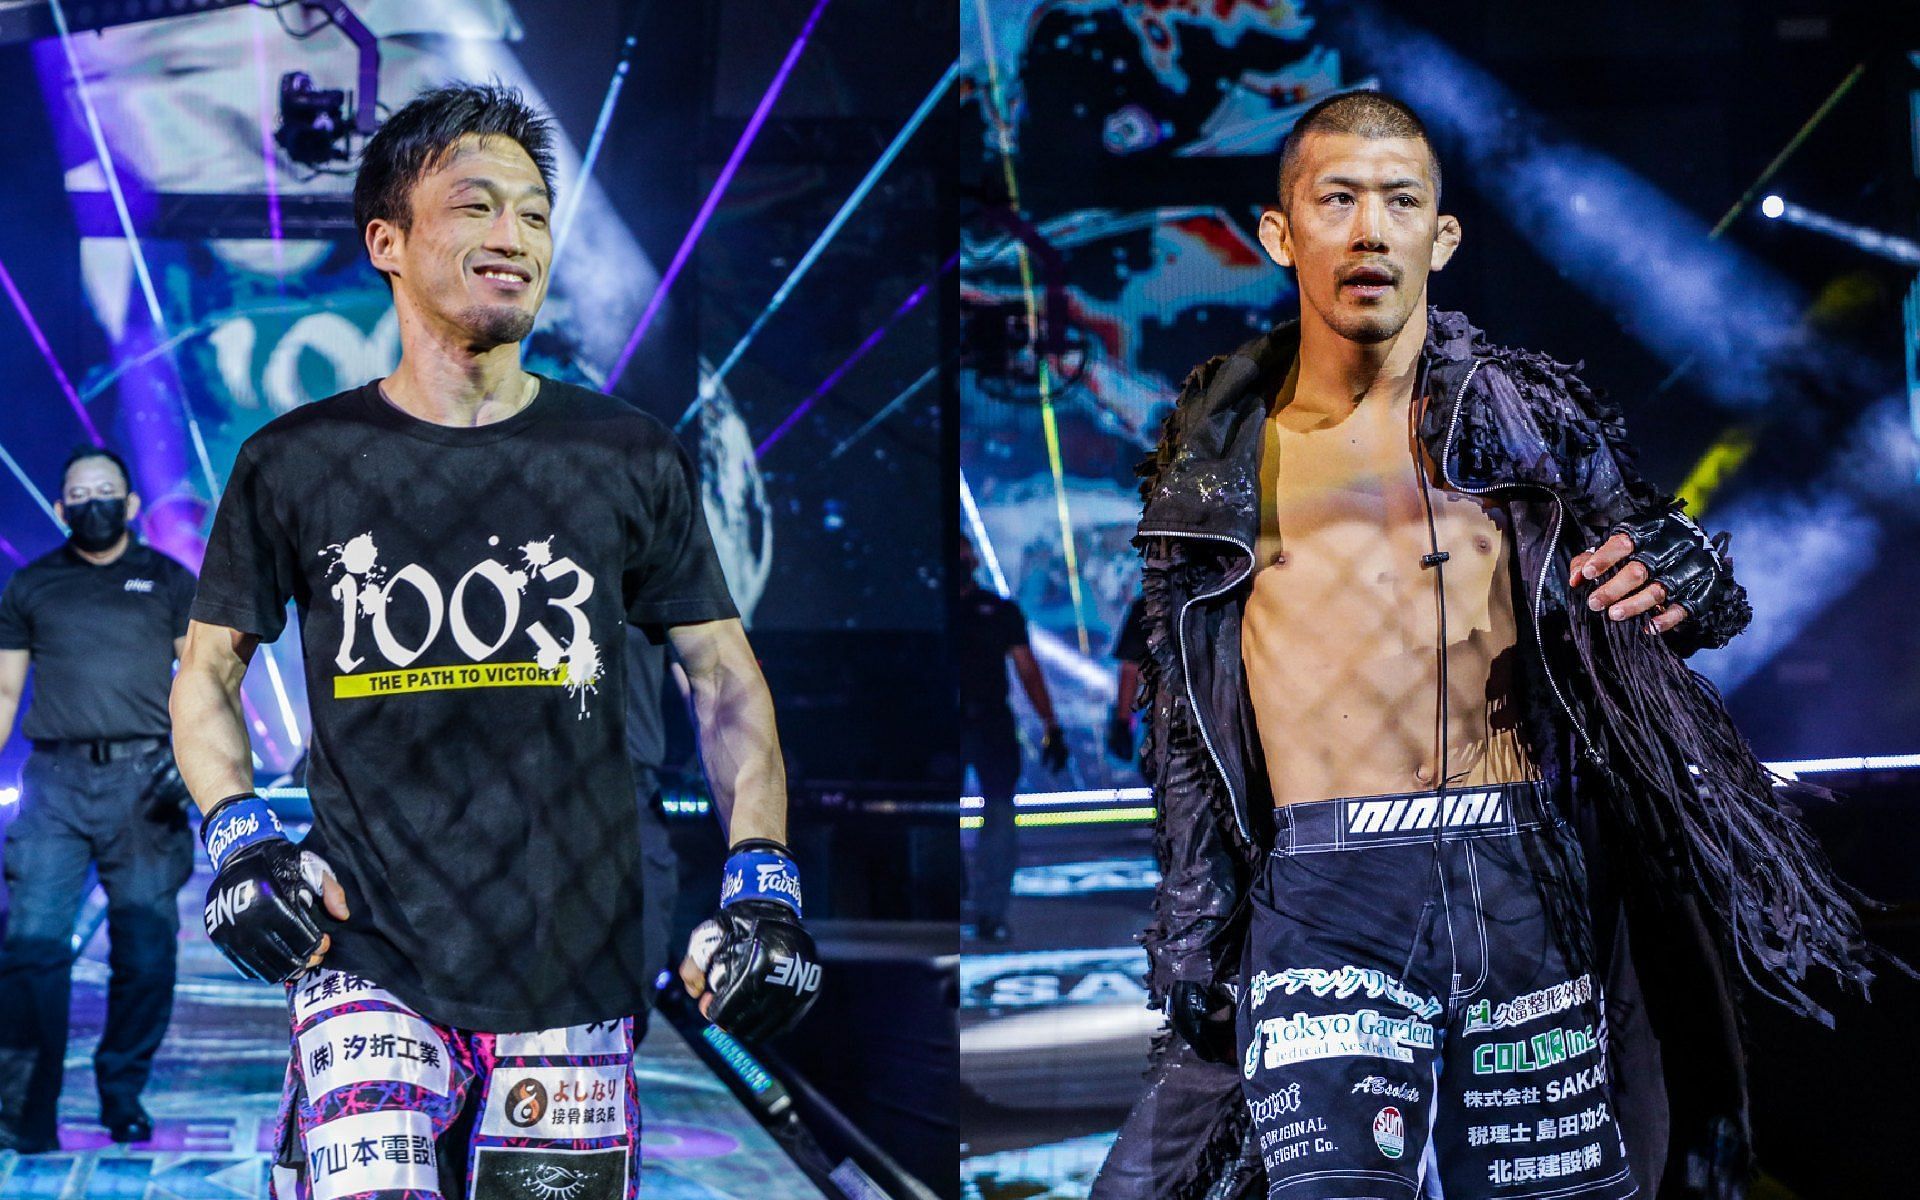 Senzo Ikeda (left) and Shoko Sato (right) say they&#039;re physically fine after testing positive for COVID-19 upon their return to Japan. [Photos ONE Championship]